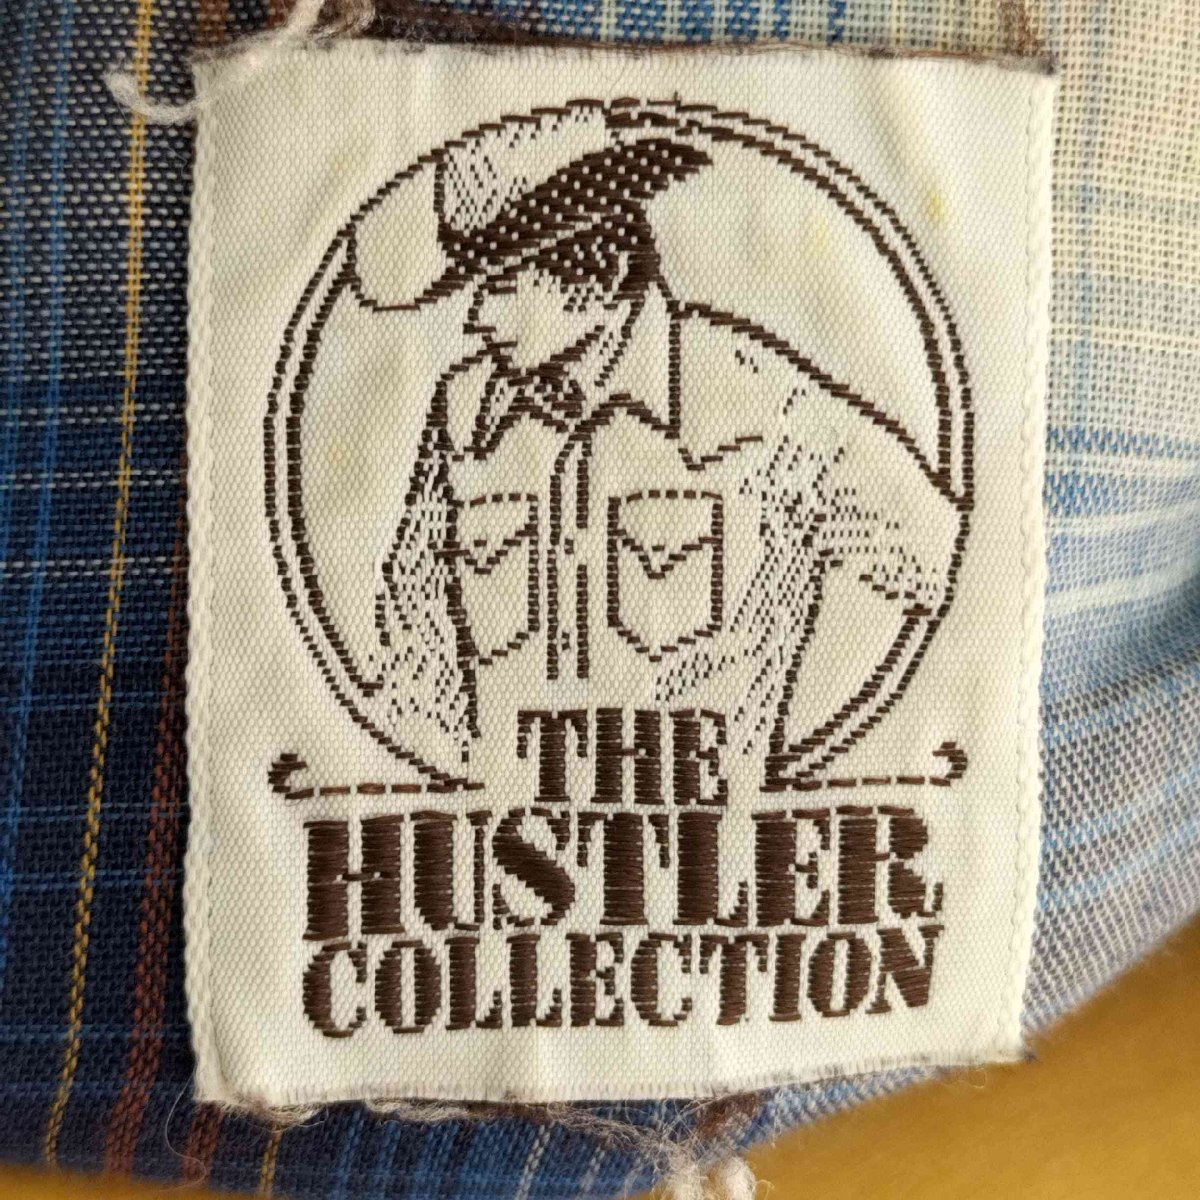 USED古着(ユーズドフルギ) THE HUSTLER COLLECTION 70sウエスタンシャ 中古 古着 0422_画像6